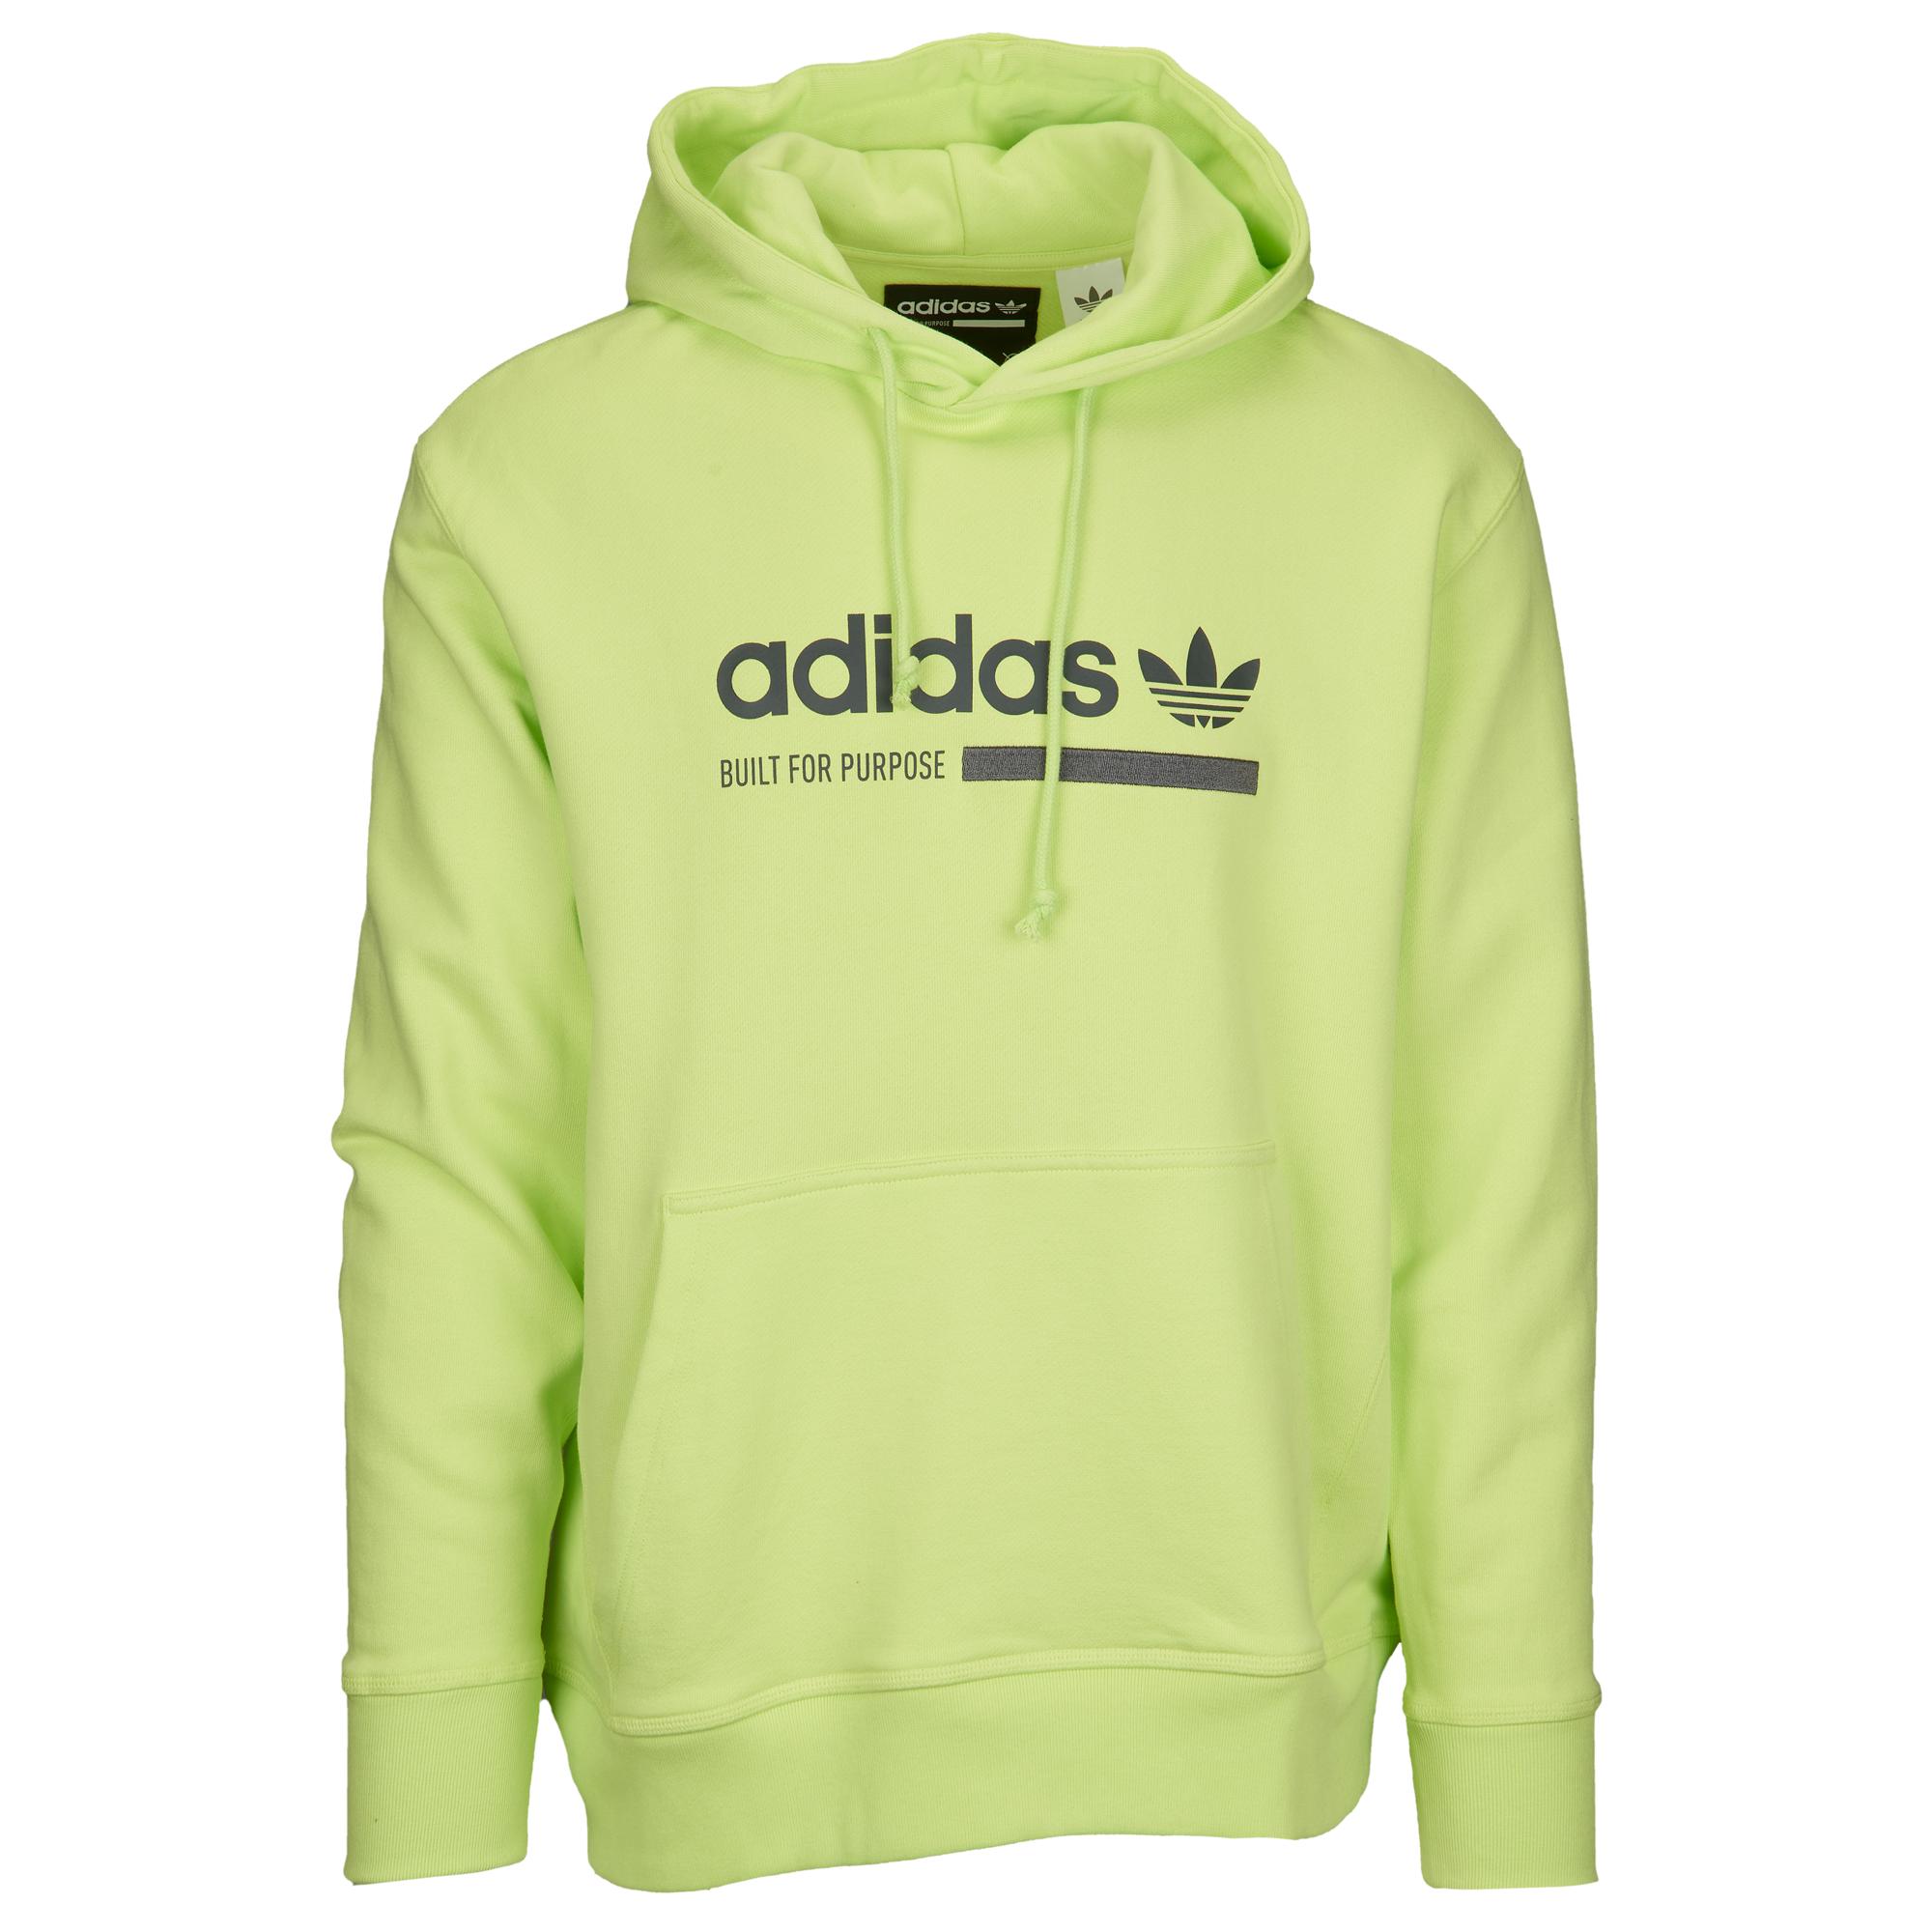 adidas Originals Cotton Kaval Oth Pullover Hoodie in Green for Men - Lyst